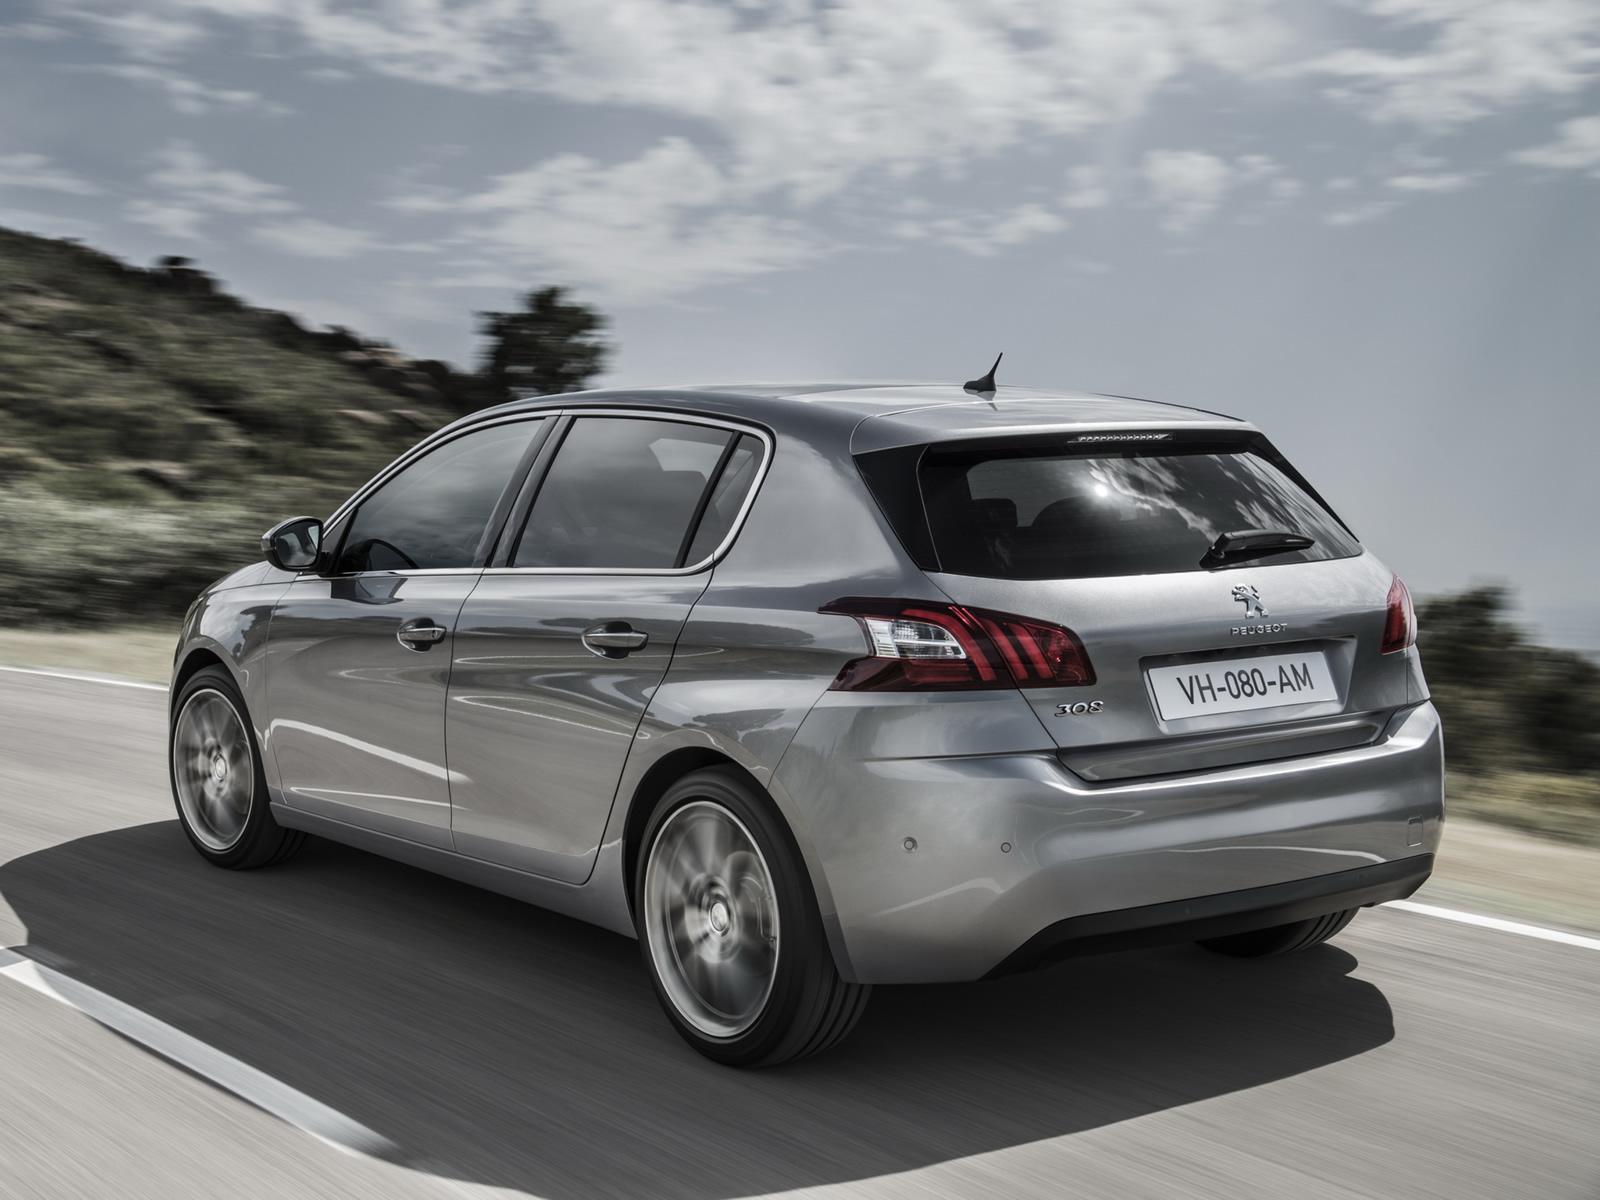 Swift Peugeot 308 wallpaper and image, picture, photo